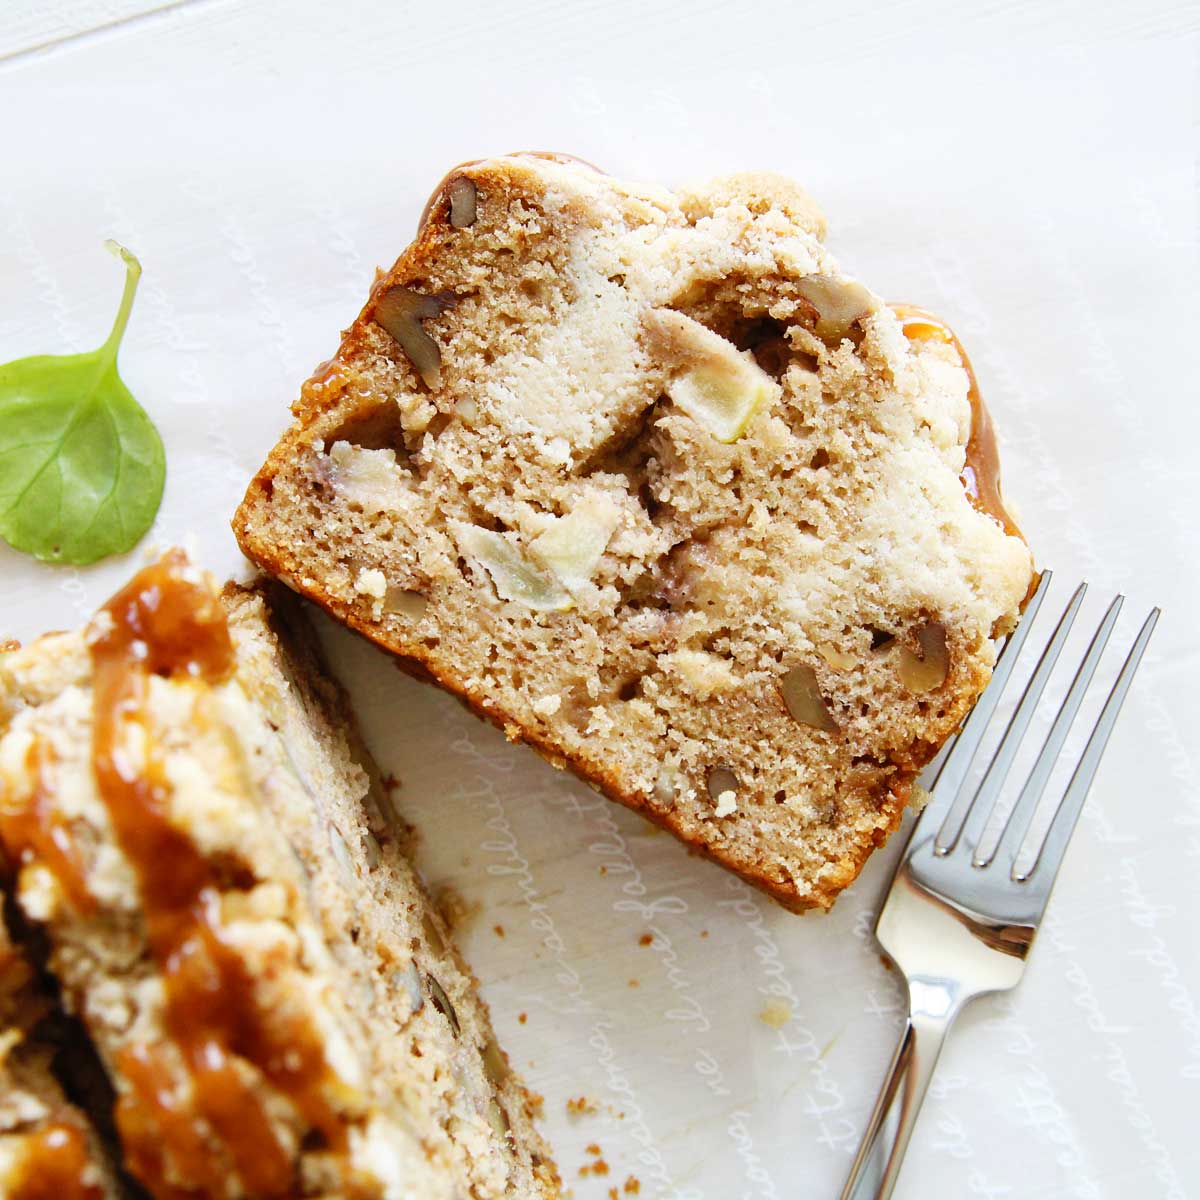 The Most Comforting Applesauce Banana Bread with Streusel Topping - Peanut Butter Banana Bread